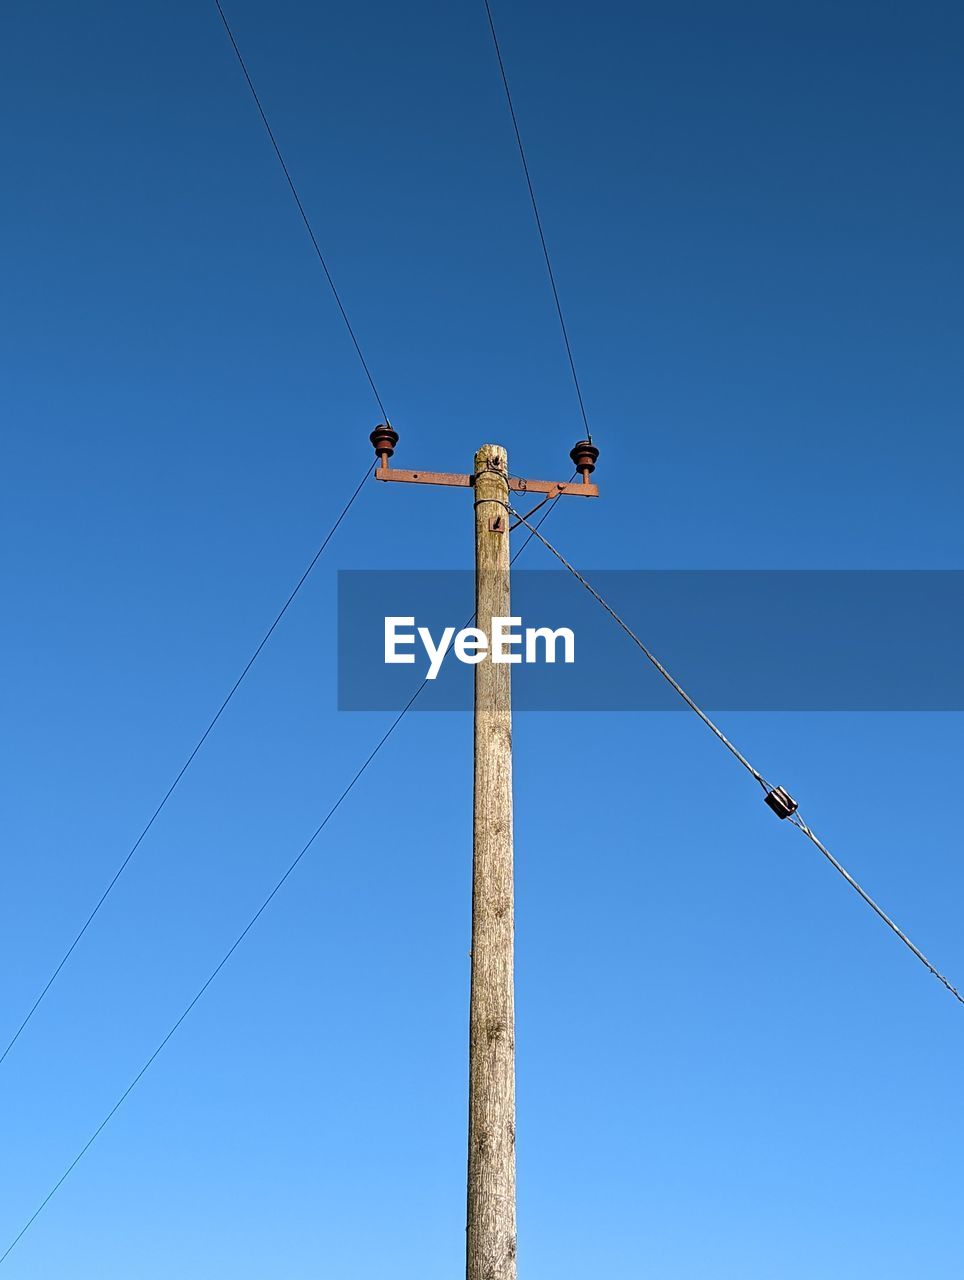 cable, electricity, blue, sky, technology, clear sky, overhead power line, low angle view, power generation, power supply, mast, nature, power line, line, street light, telephone line, day, no people, outdoors, electricity pylon, telephone pole, hanging, pole, equipment, communication, outdoor structure, sunny, copy space, architecture, electrical supply, industry